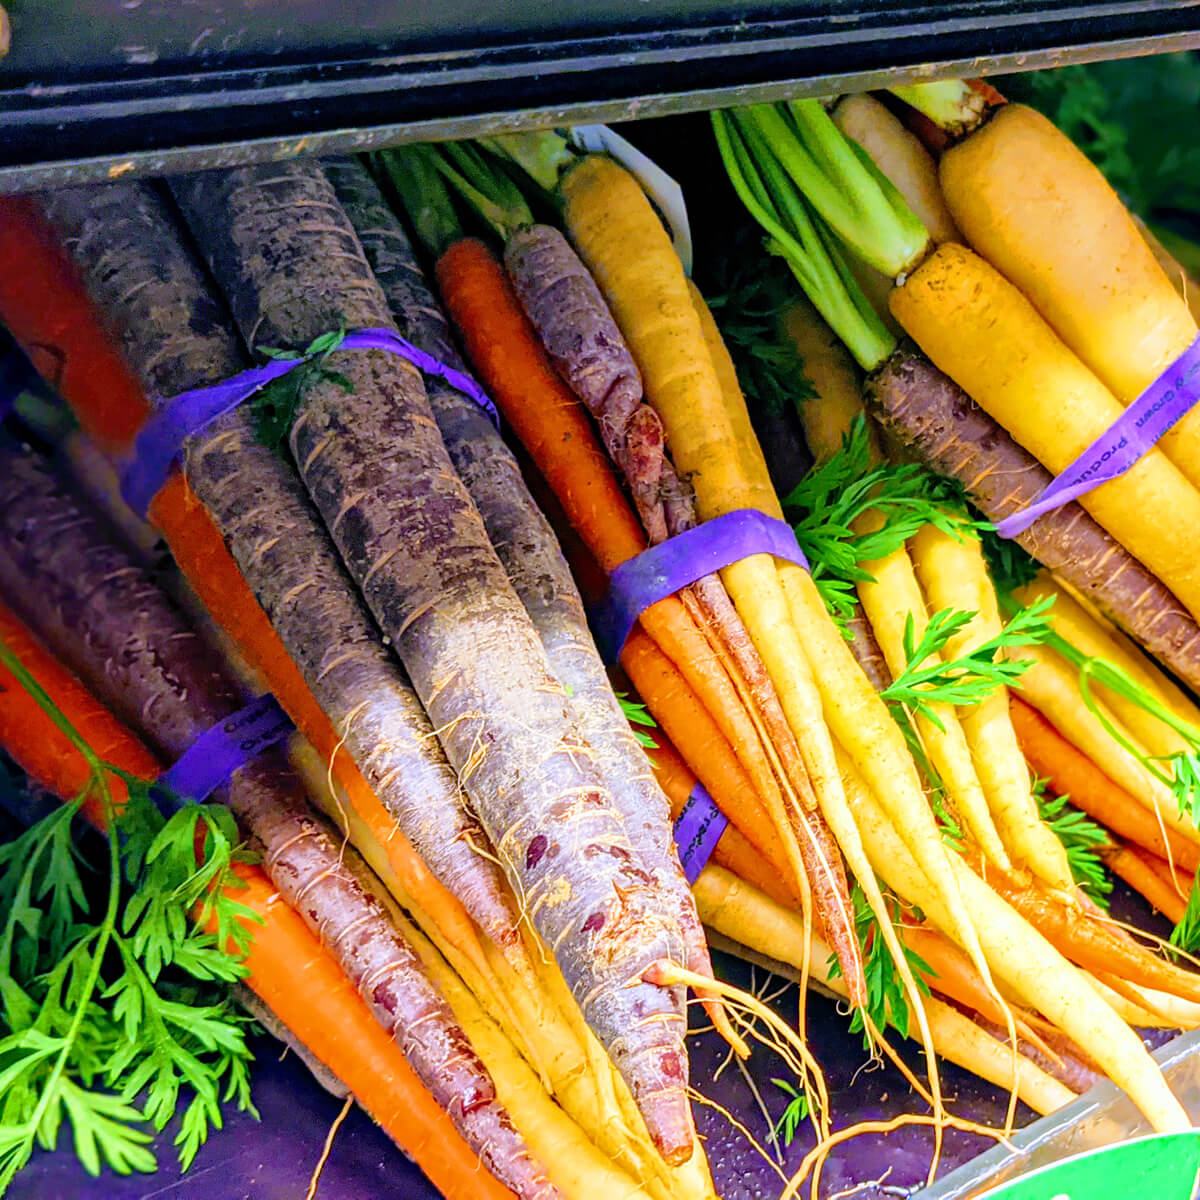 Bunches of Rainbow Carrots at the Grocery Store - Purple, White and Orange